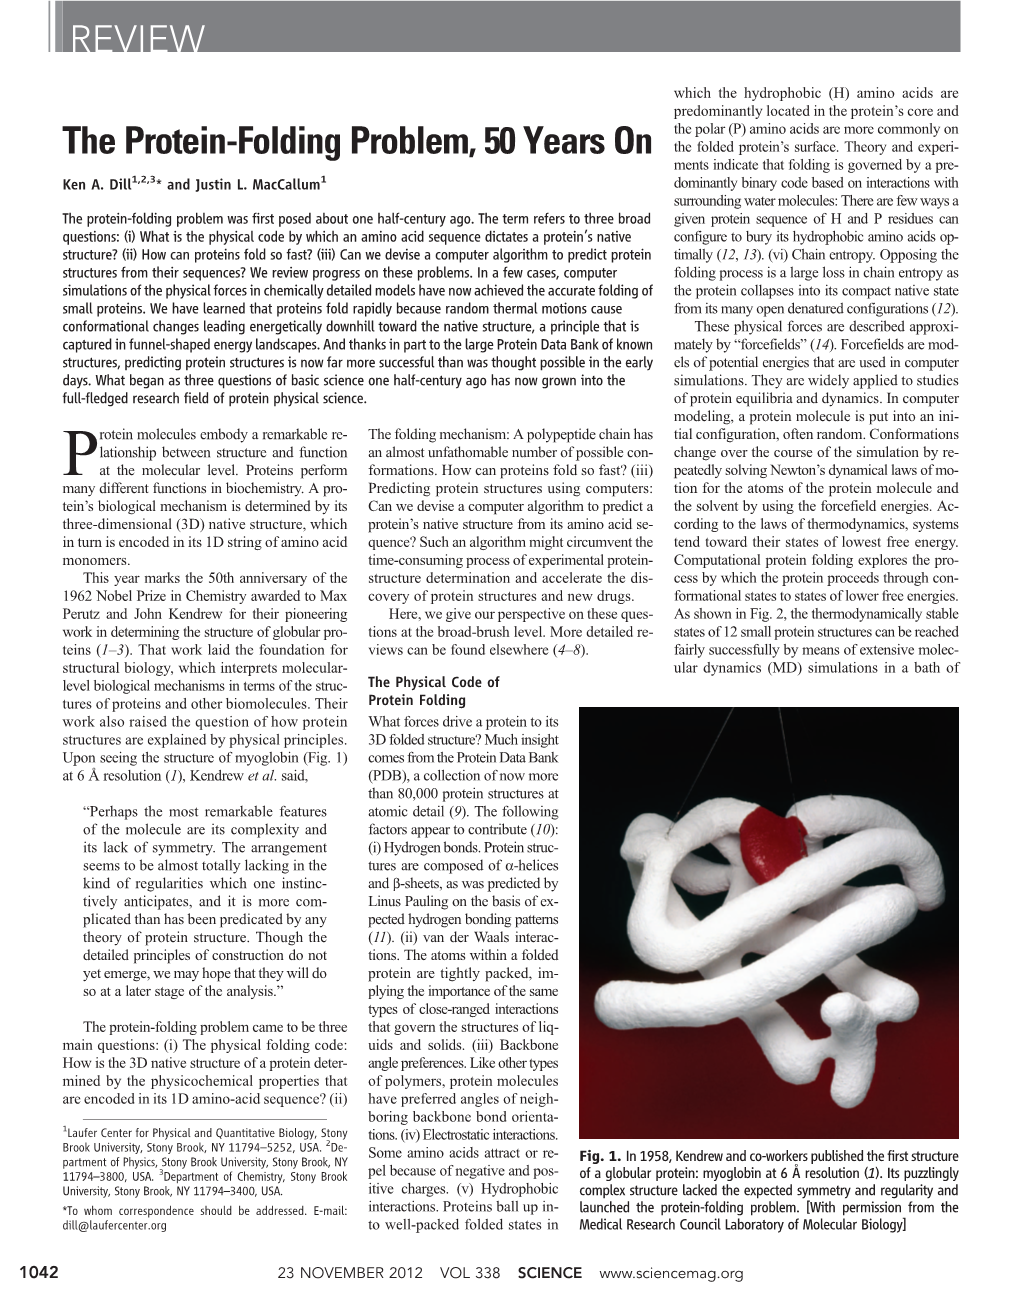 The Protein-Folding Problem, 50 Years on REVIEW